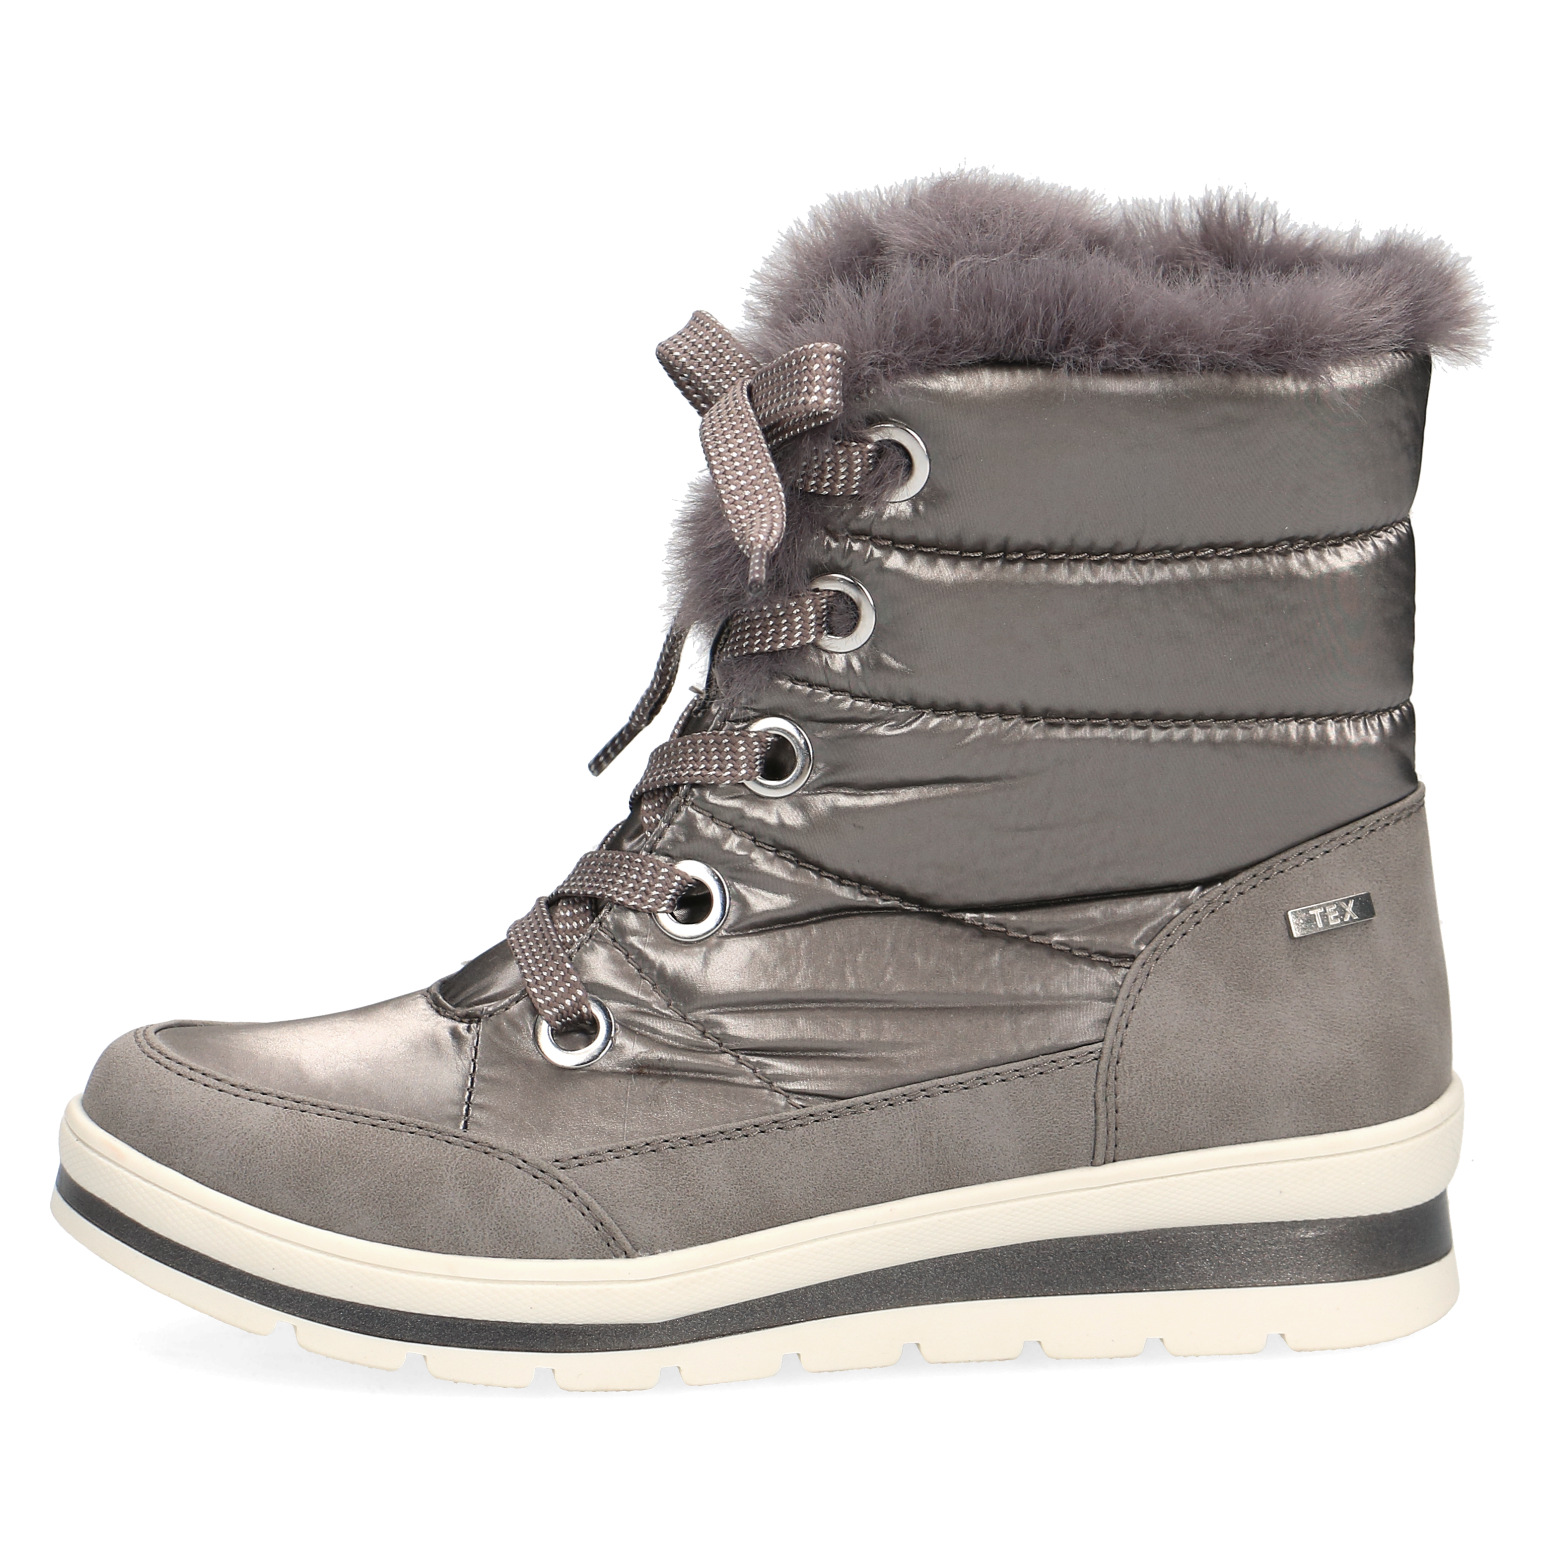 Boot - Taupe Synthetics